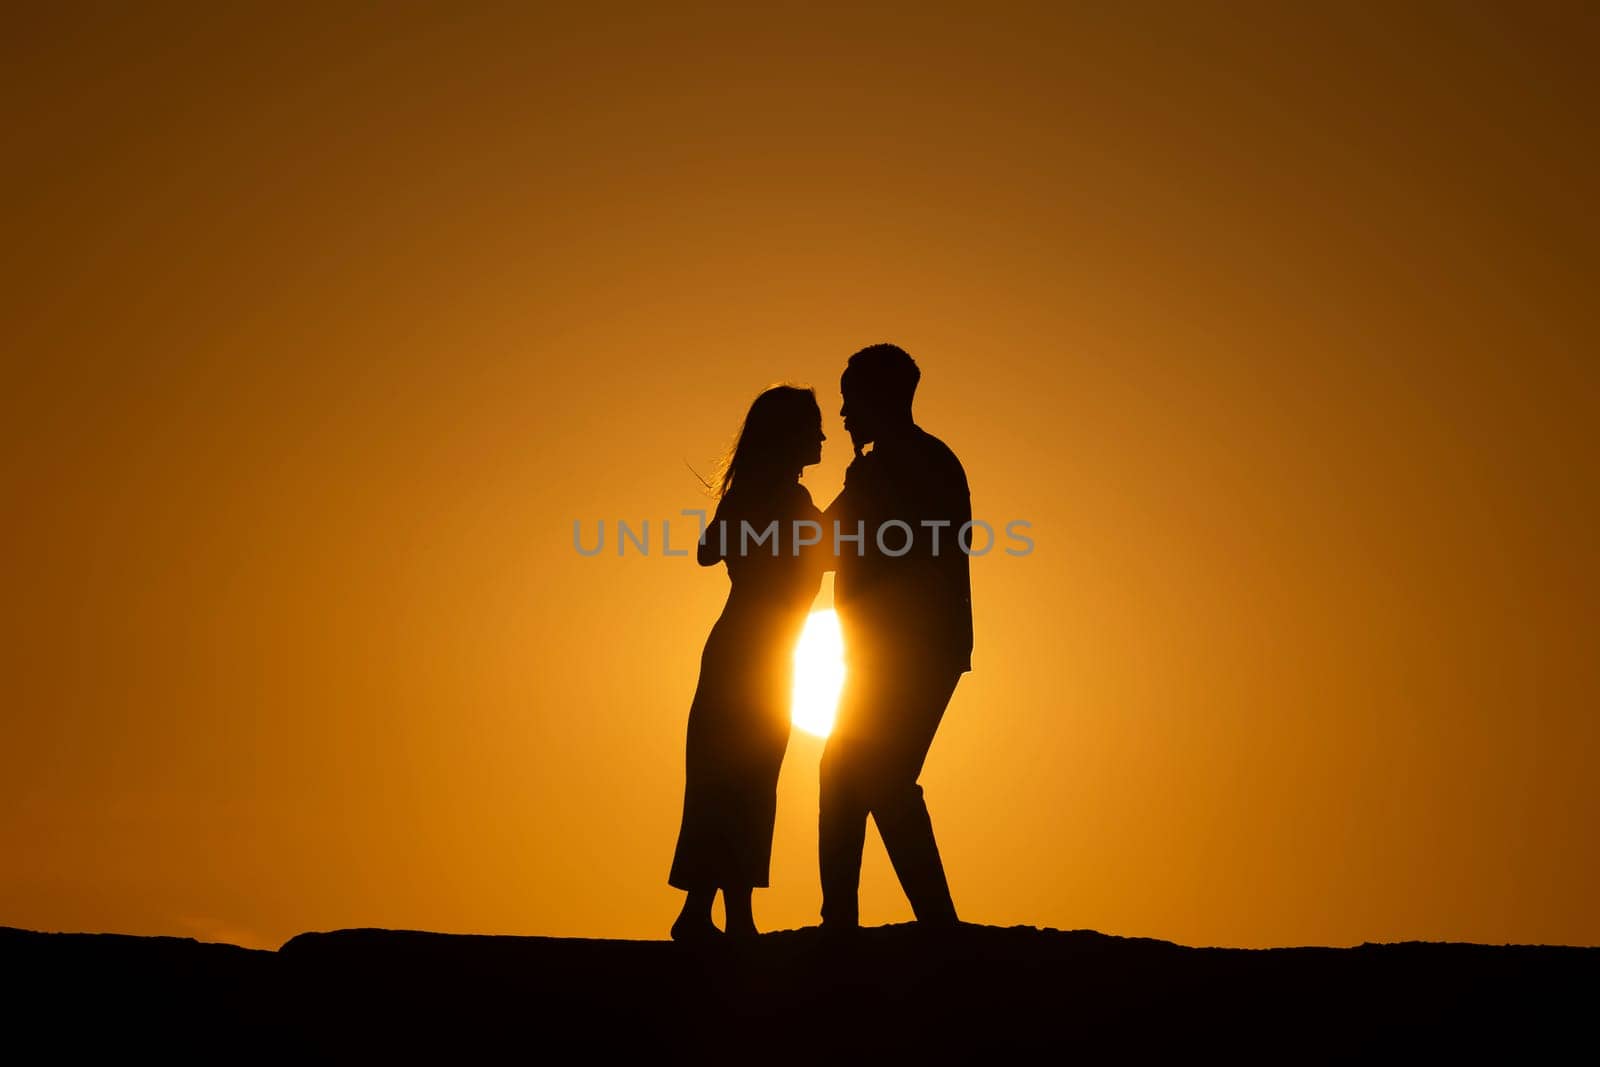 A couple is silhouetted against a sunset, with the woman wearing a dress and the man wearing a jacket